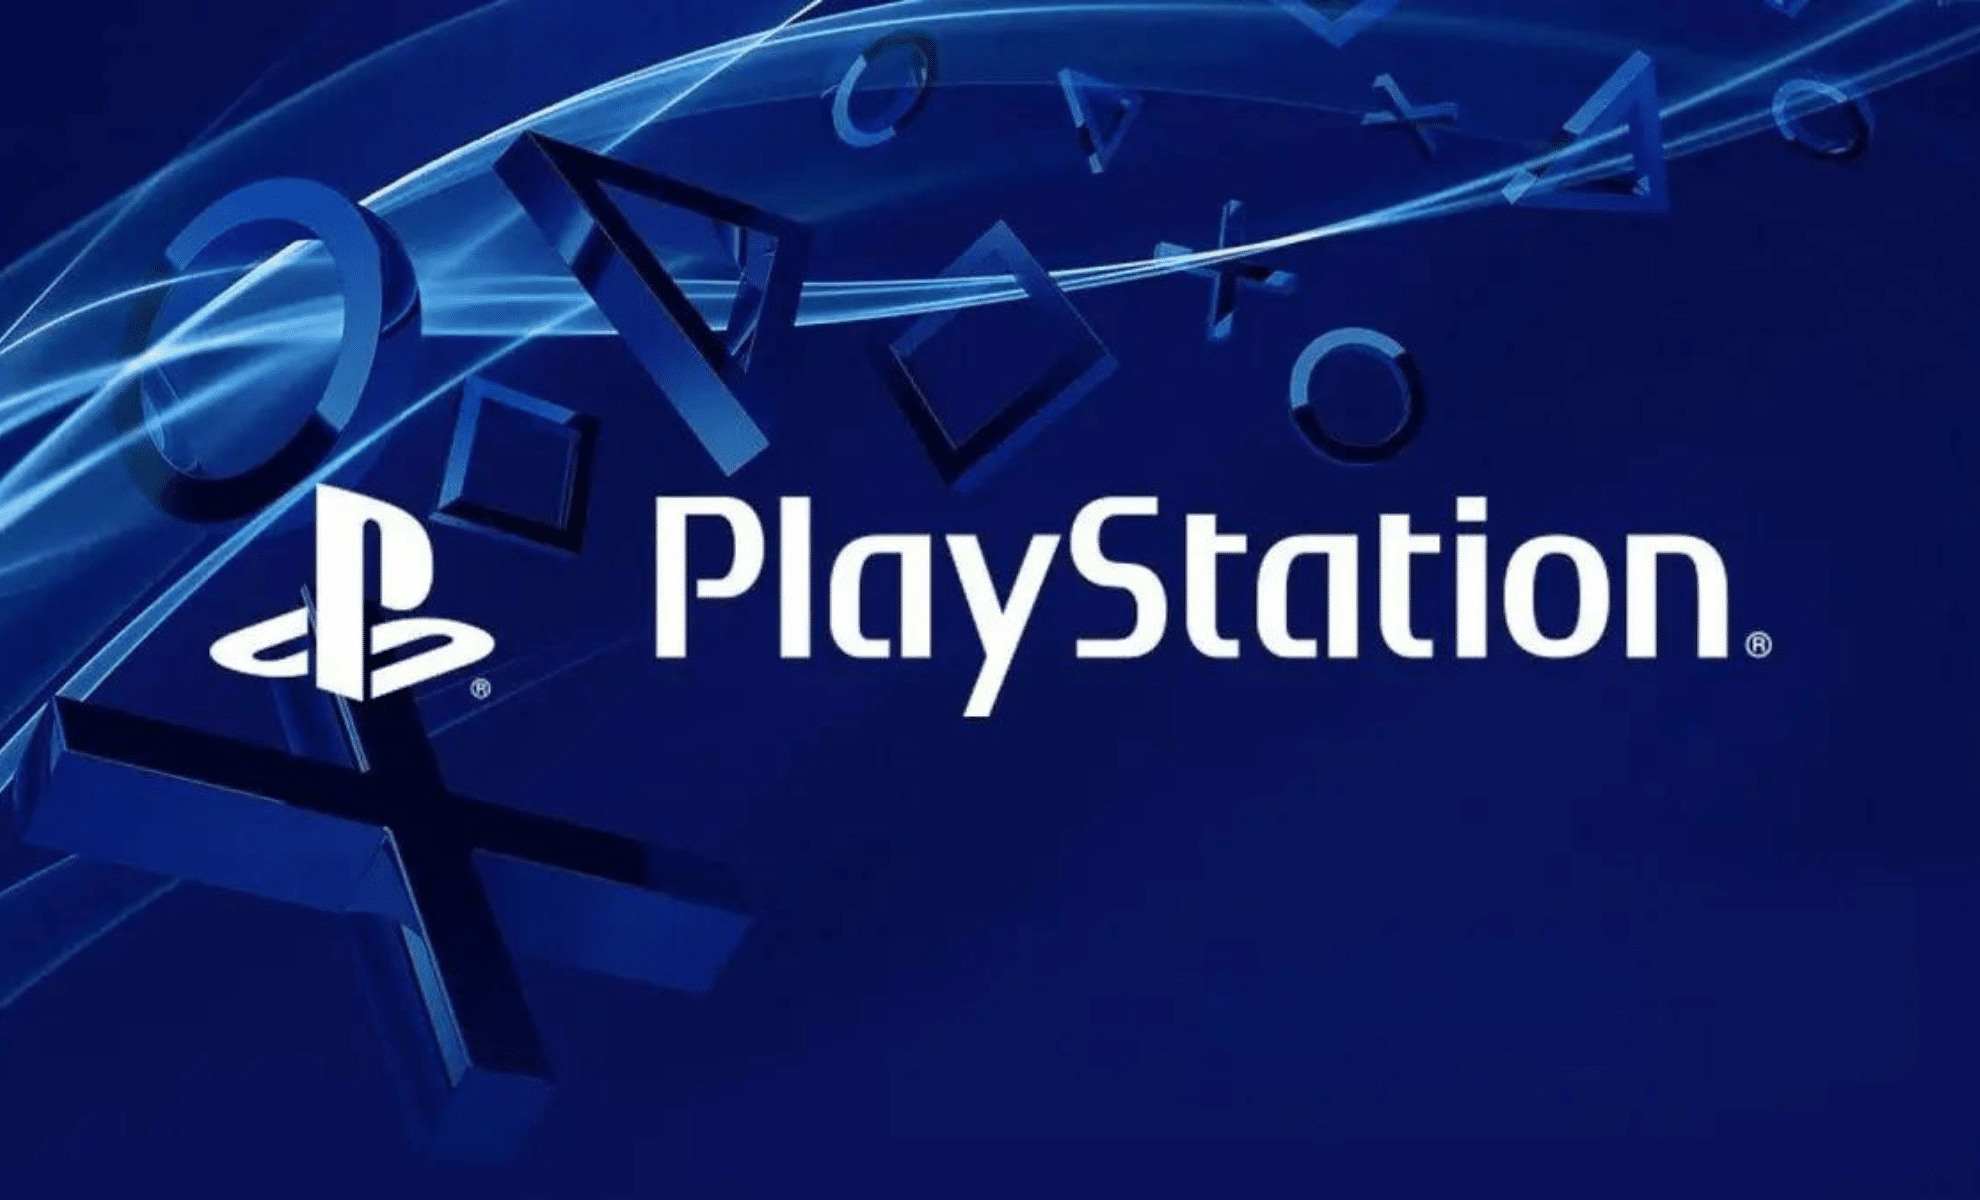 Sony’s PlayStation division faces job cuts